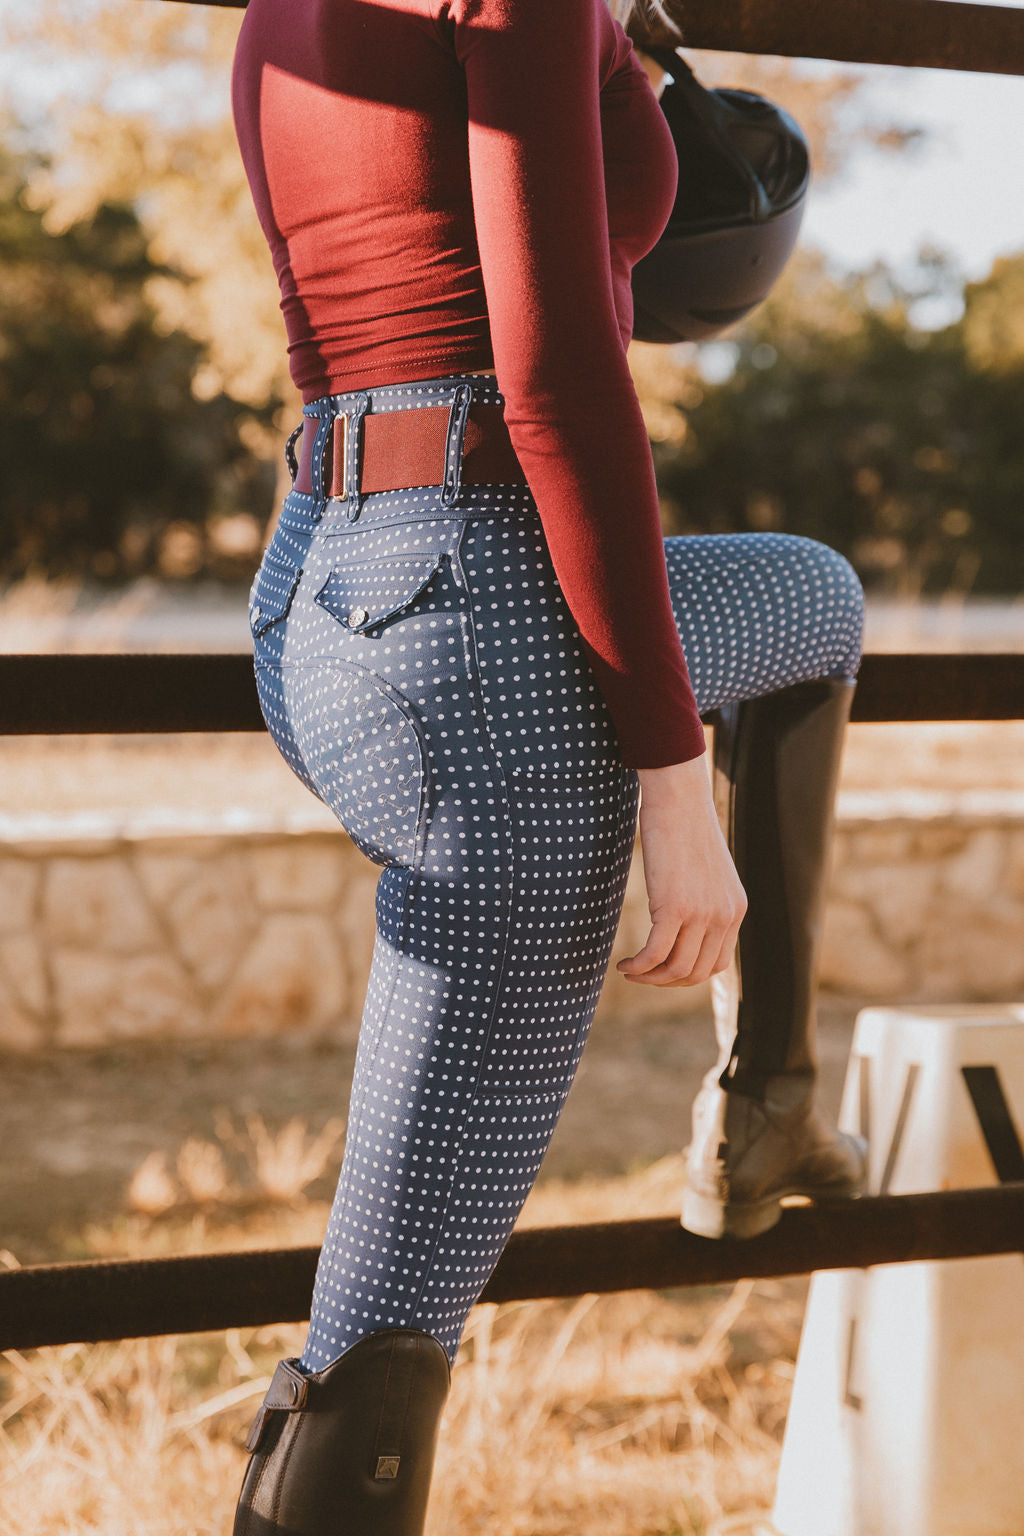 Canter Culture's riding tights feature back pockets and cell phone pockets.